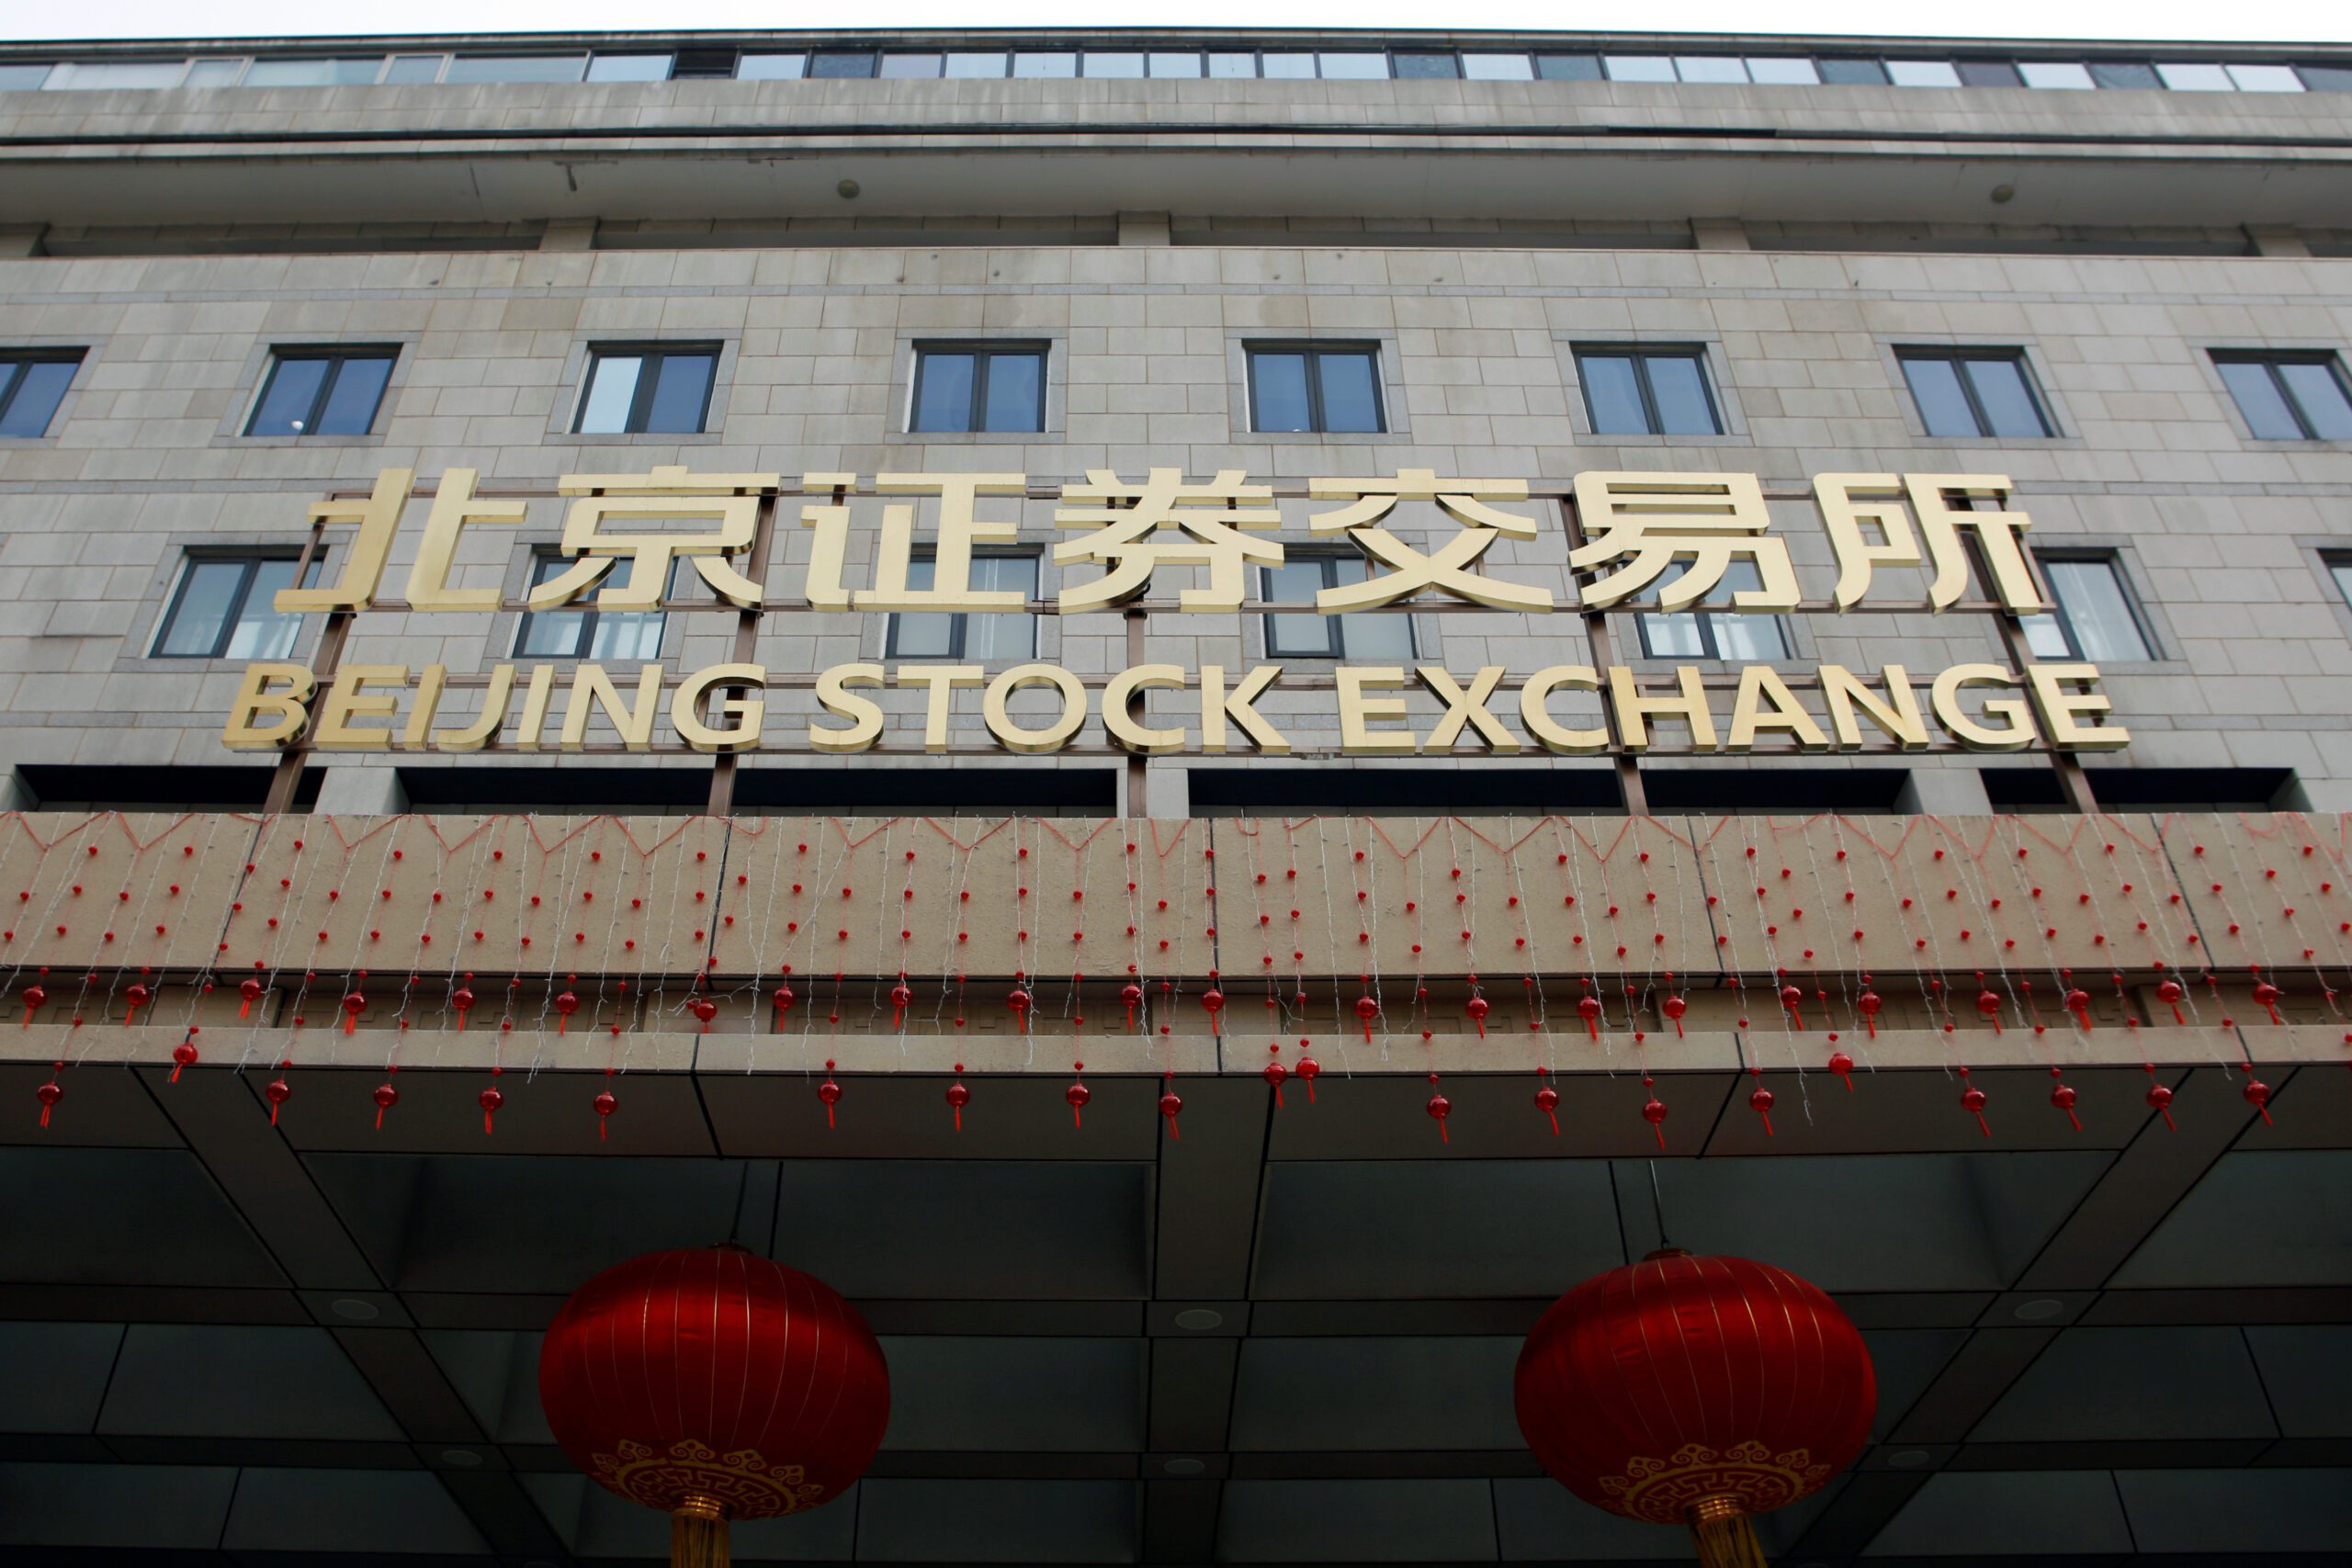 The sign of Beijing Stock Exchange is seen at its entrance during an organised media tour, in Beijing, China February 17, 2022. REUTERS/Florence Lo/File Photo